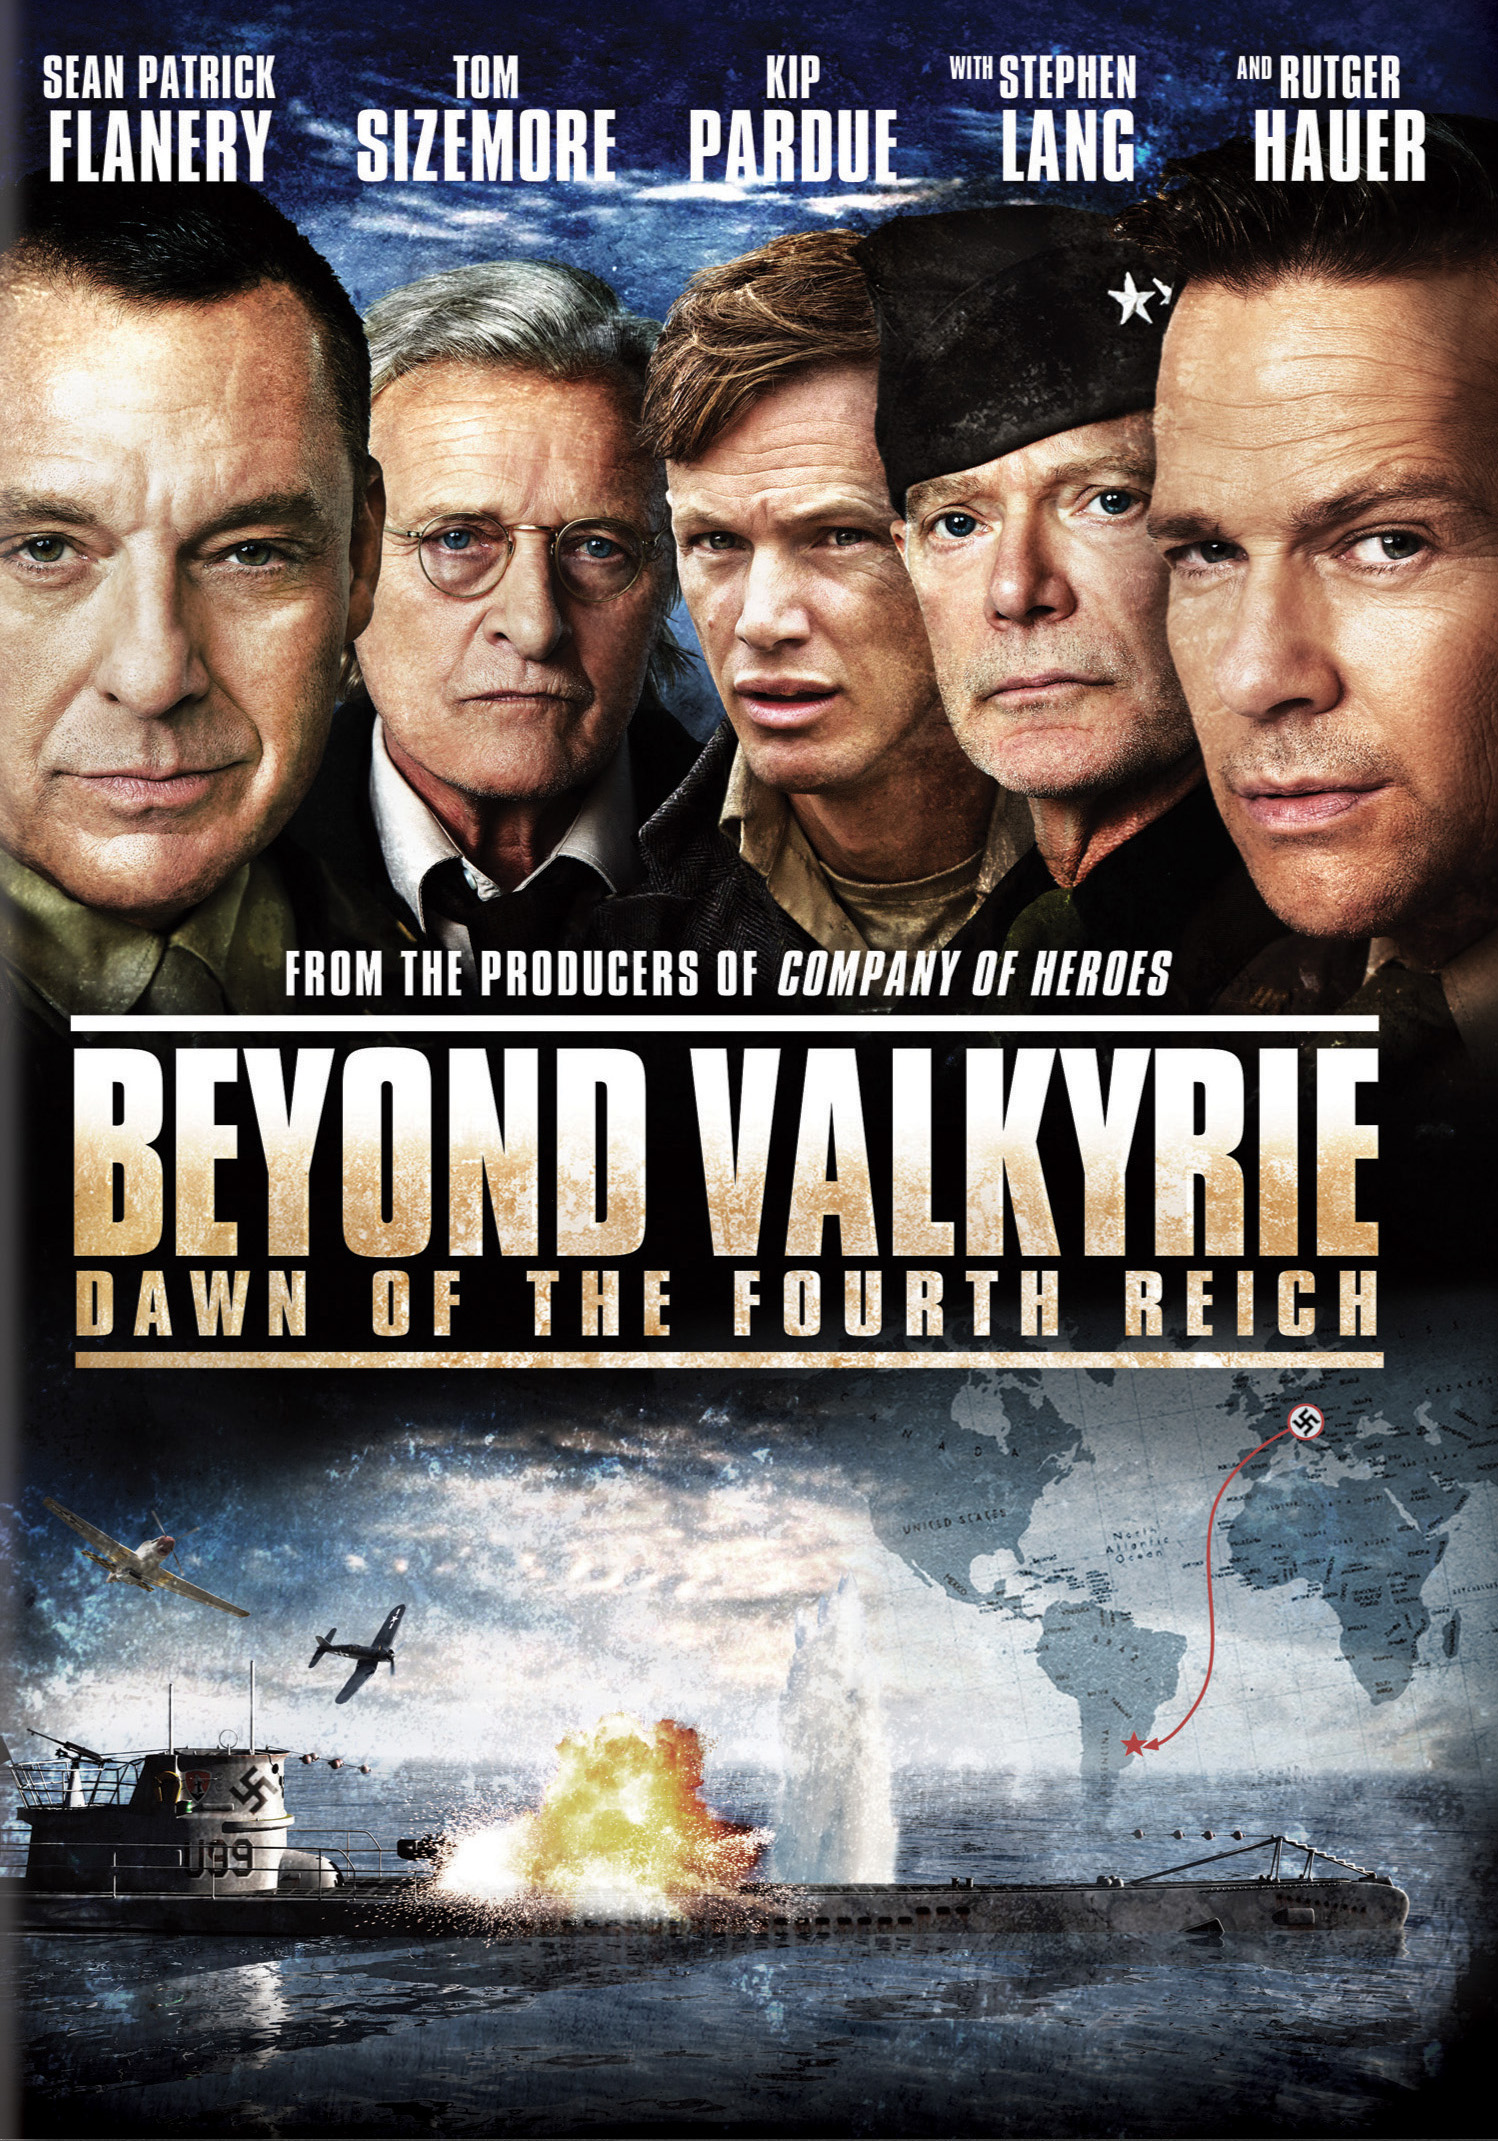 Beyond Valkyrie: Dawn of the 4th Reich (2016) Screenshot 5 